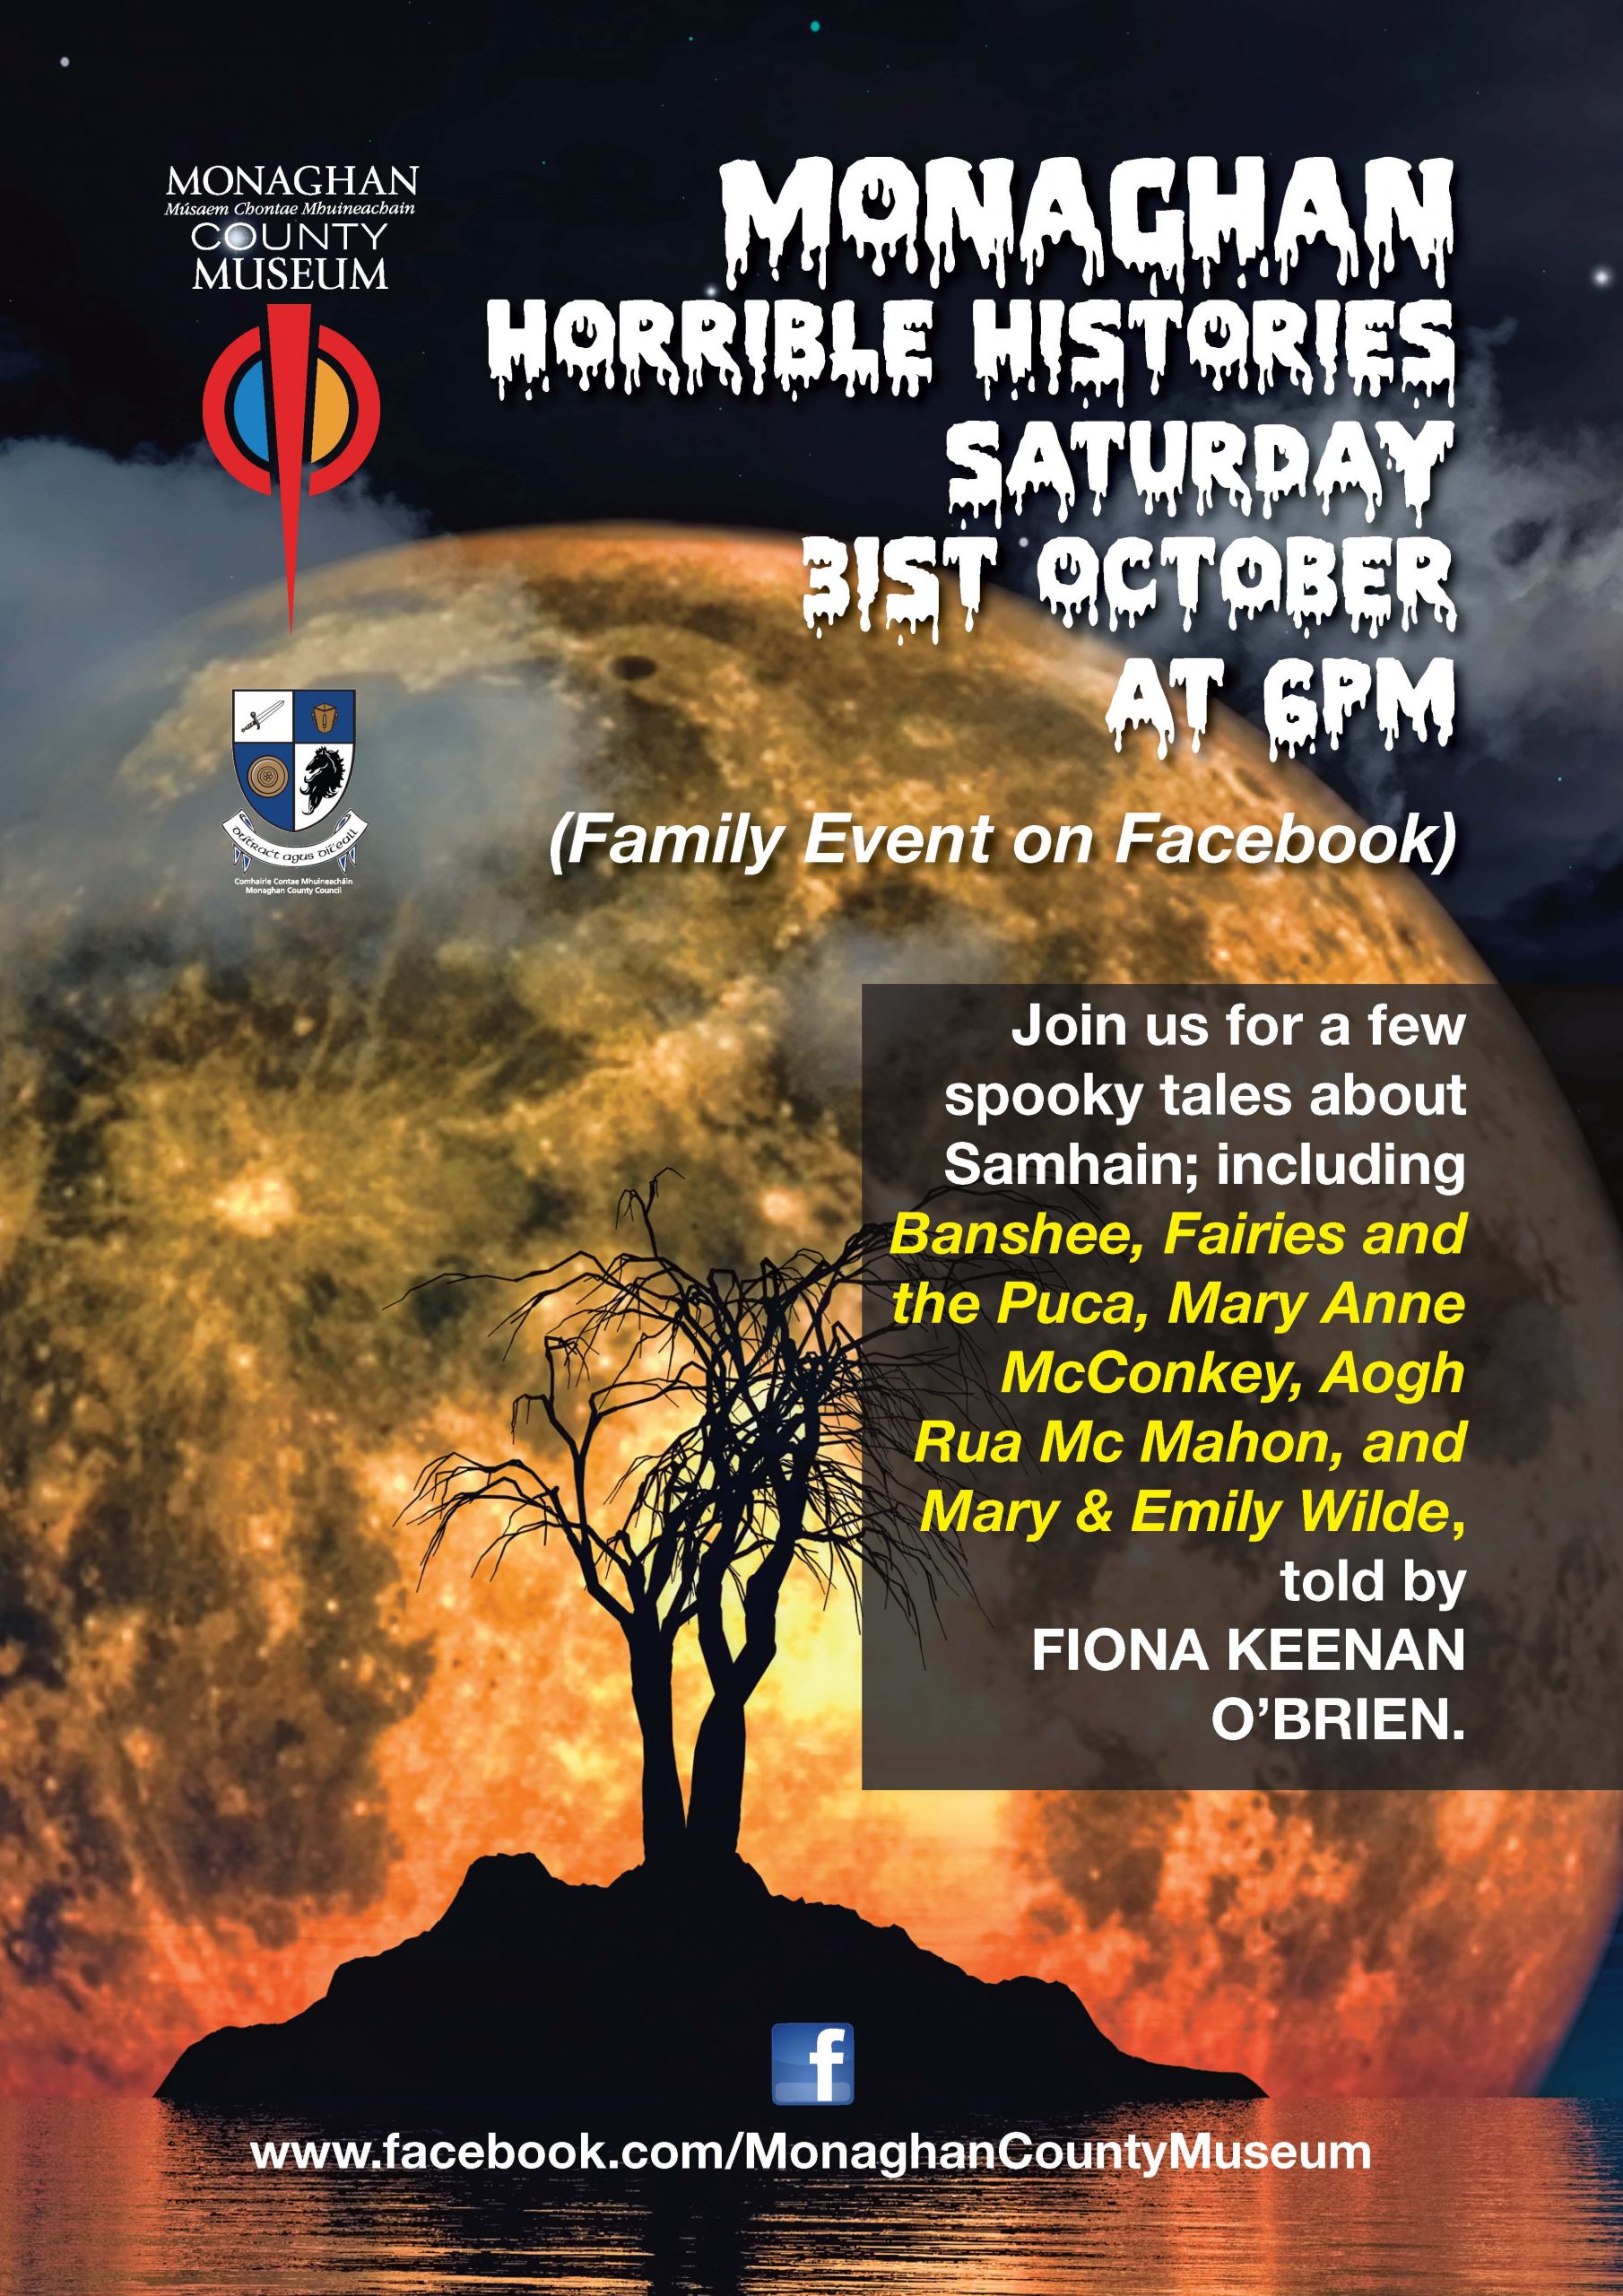 Monaghan Horrible Histories at Monaghan County Museum Saturday 31st October at 6pm 